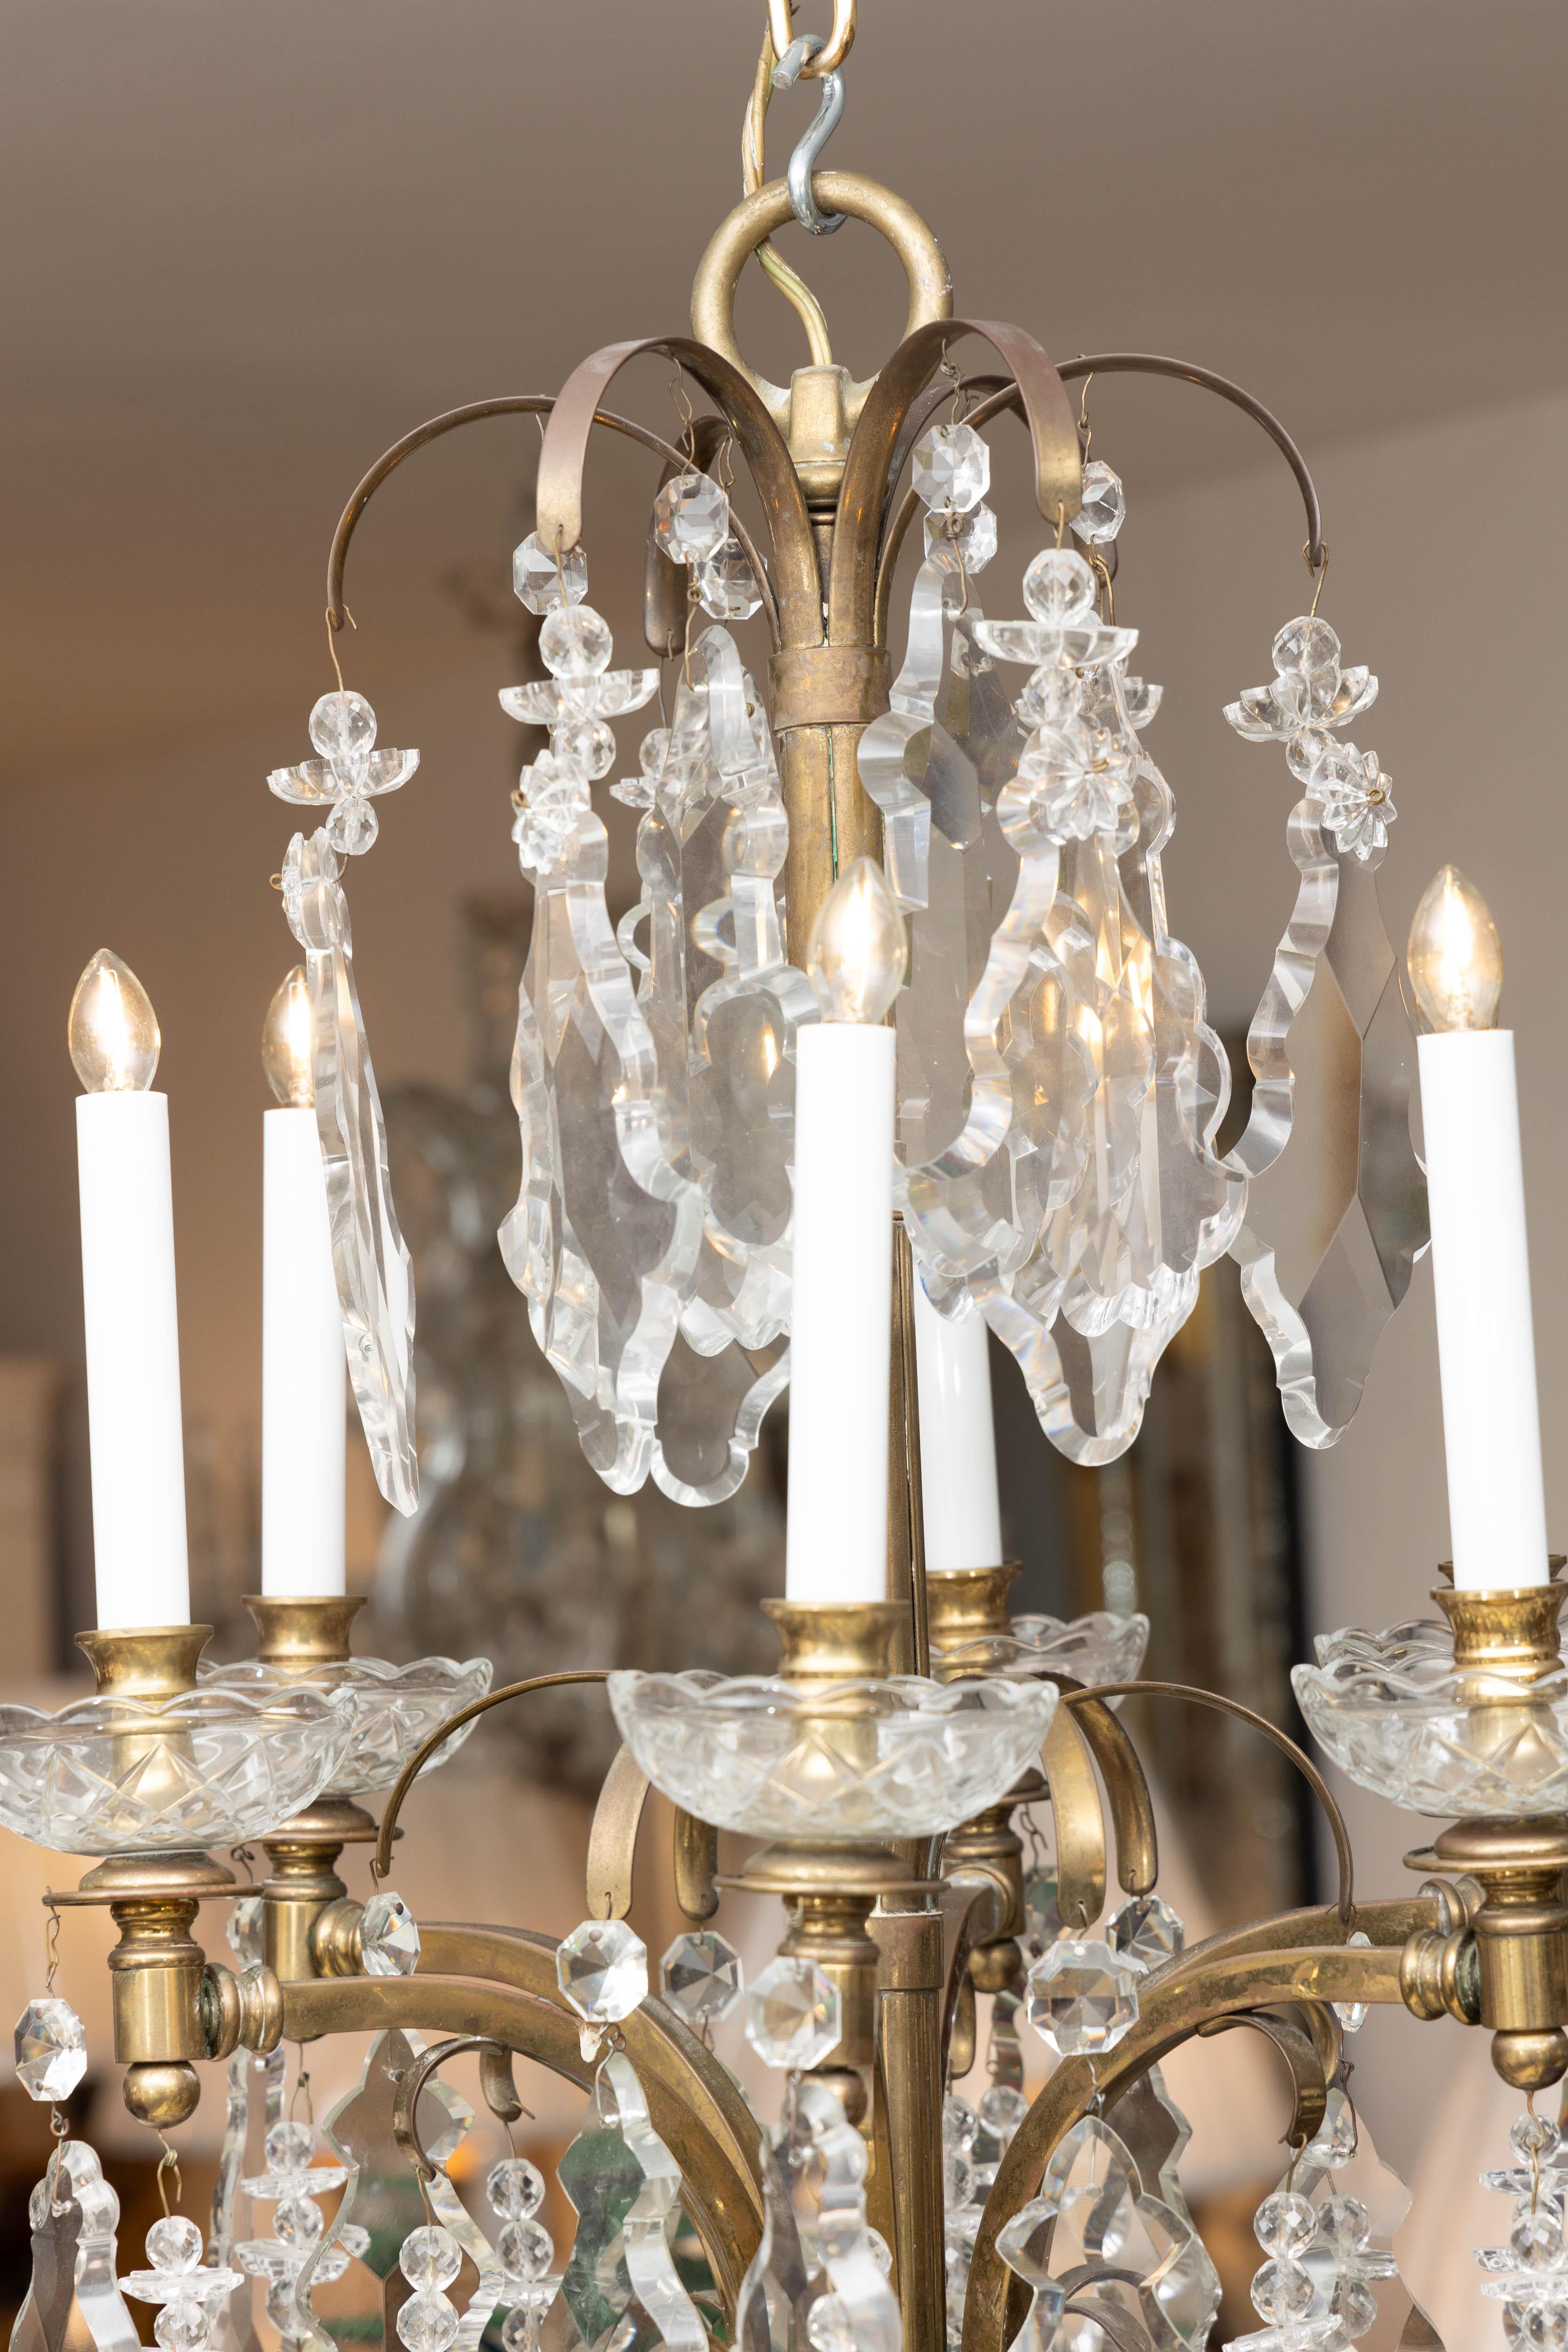 This is a beautiful early 20th century French brass chandelier strung throughout with exquisite shaped crystal prisms.